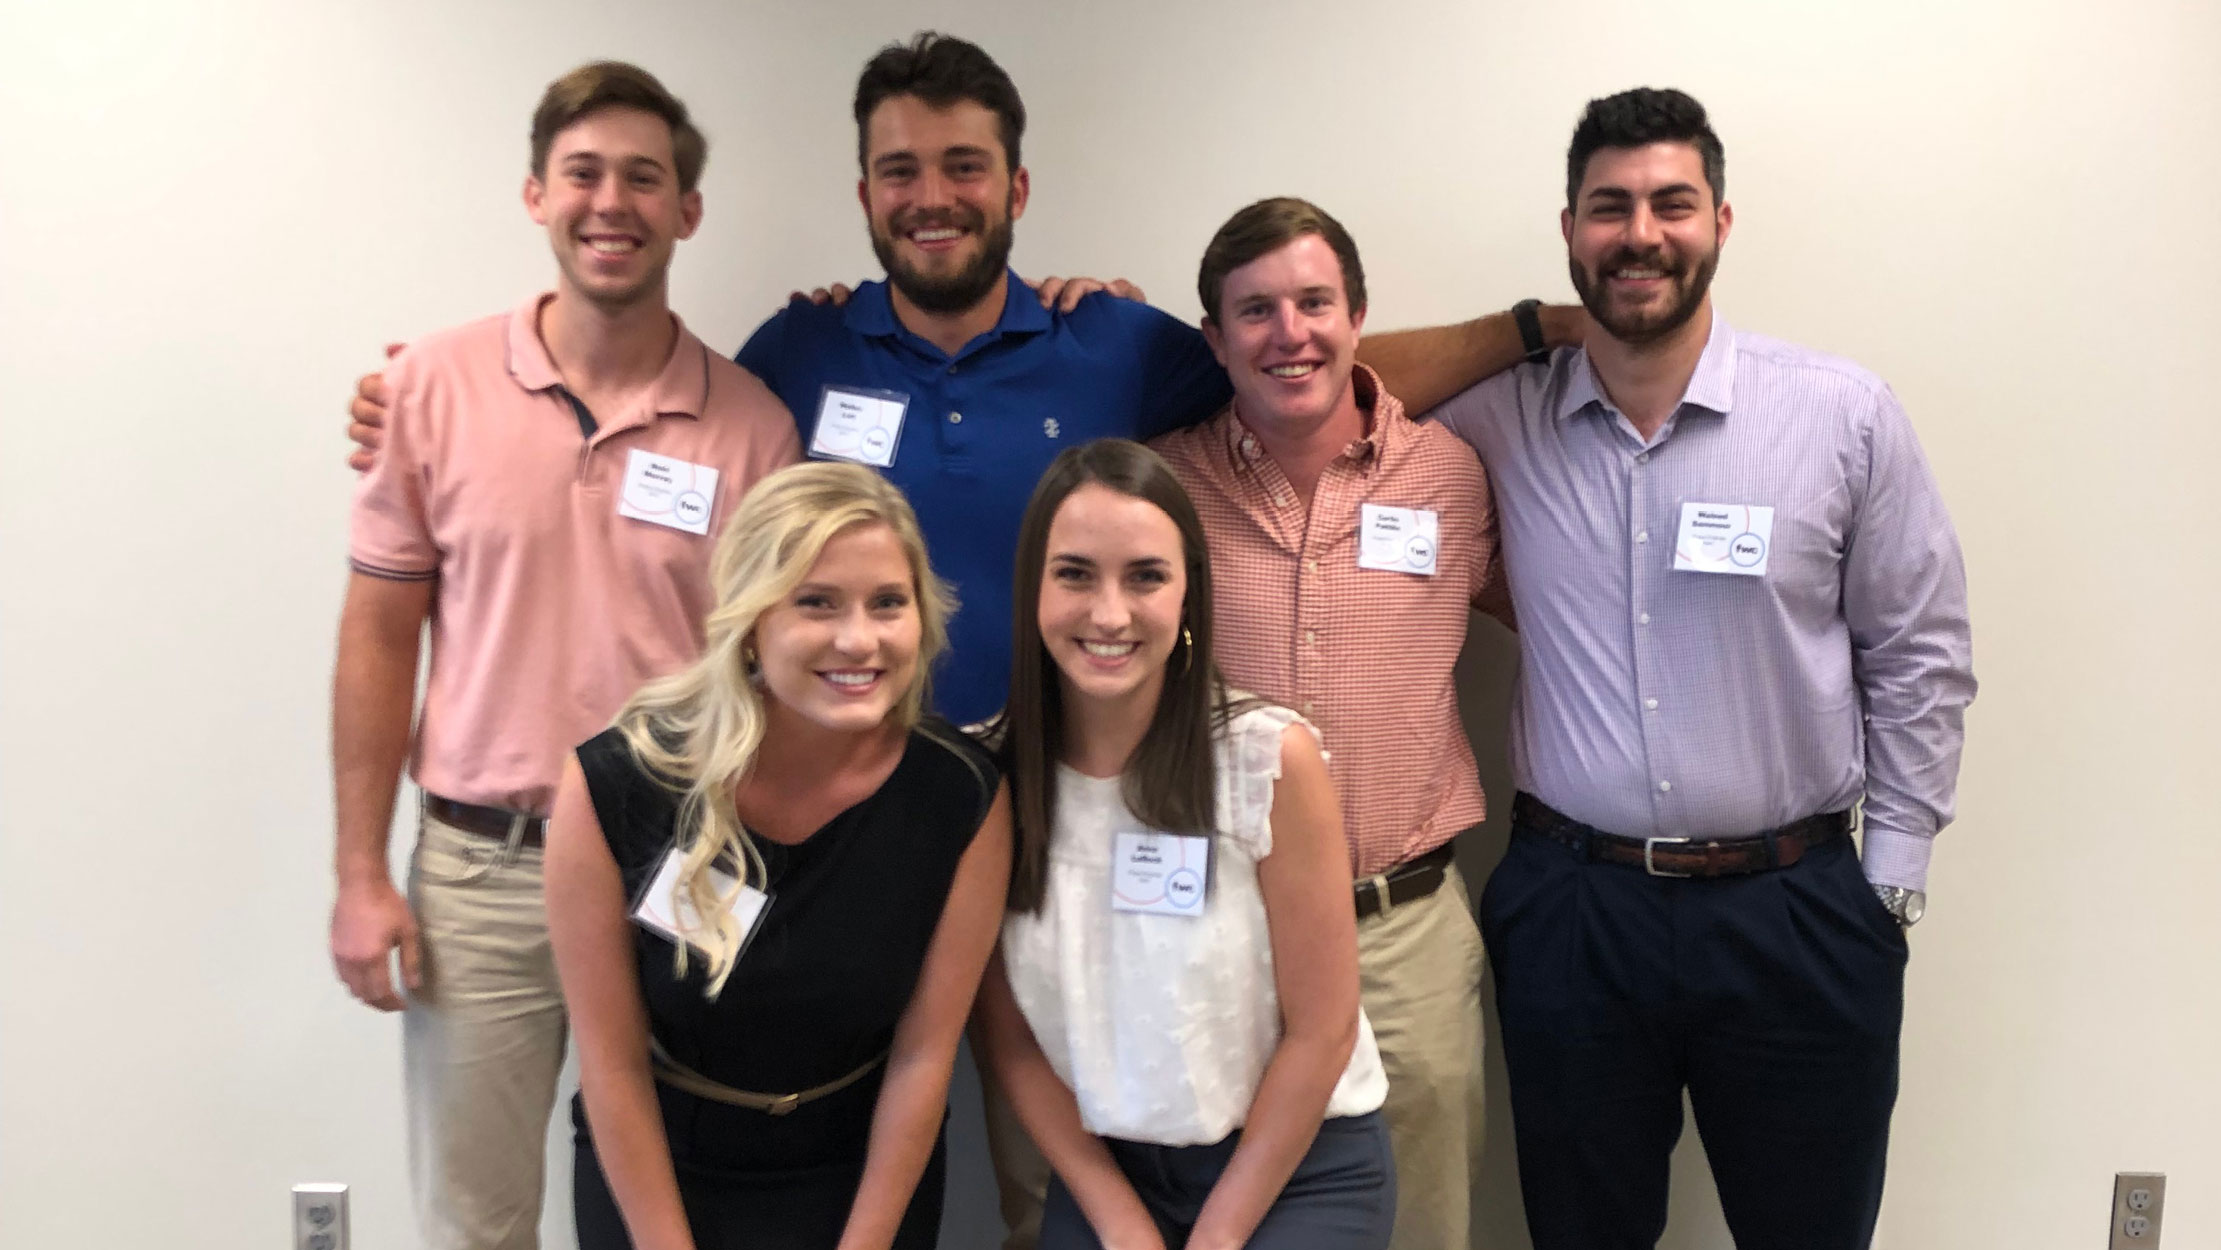 This summer, JES Holdings and its affiliate of companies hired 13 new interns in Columbia, Missouri and Atlanta, Georgia.